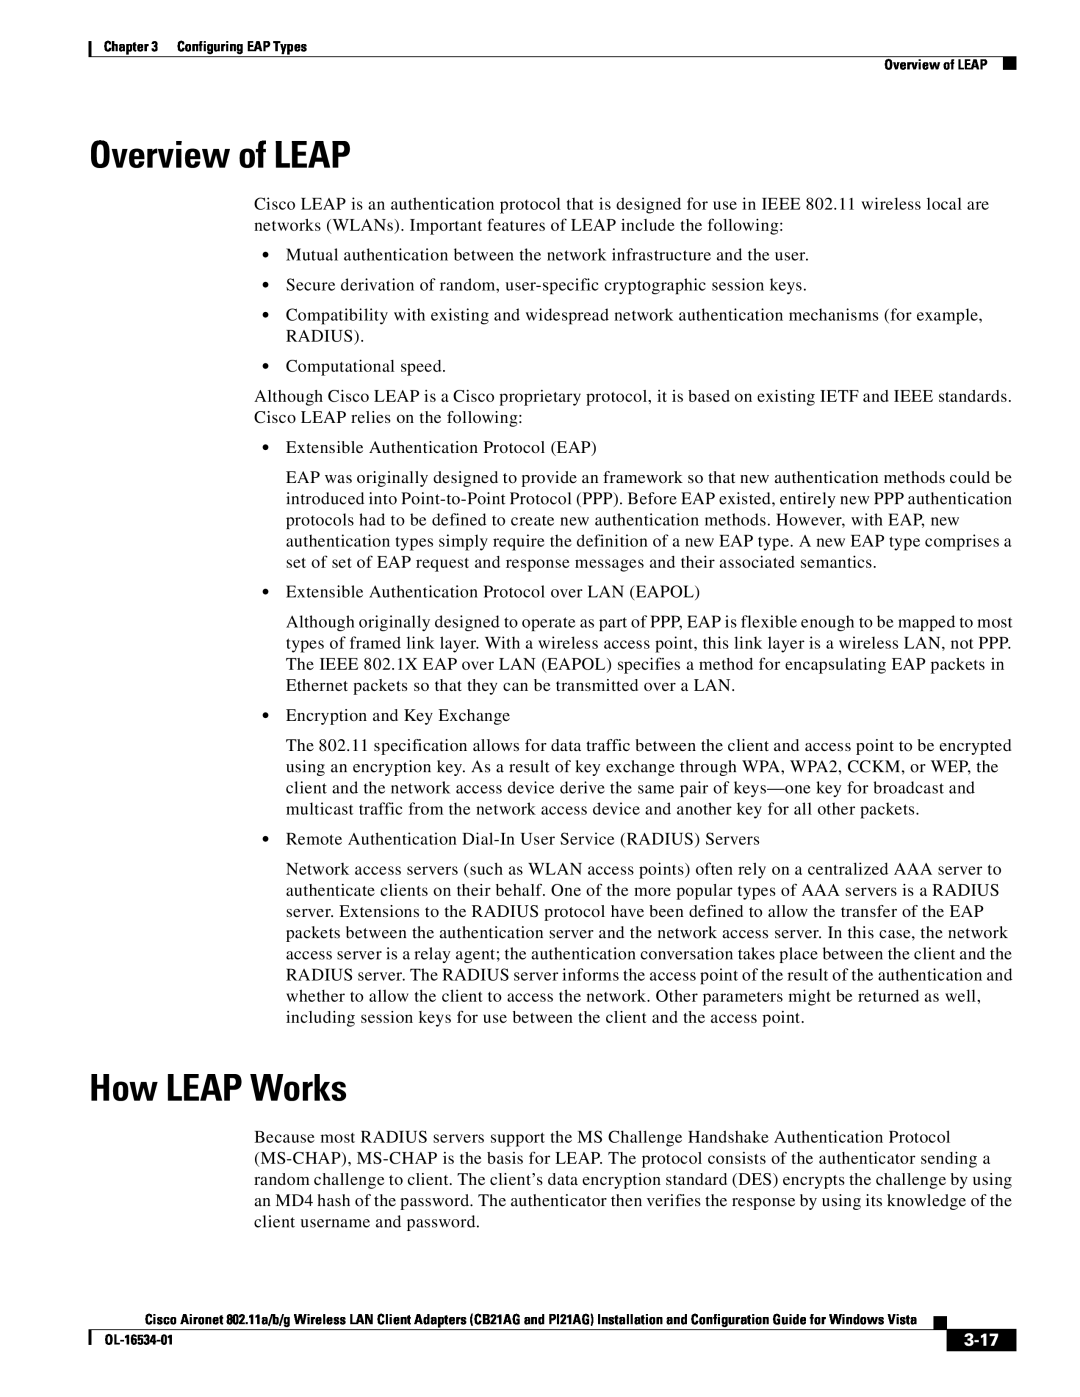 Cisco Systems CB21AG, PI21AG manual Overview of LEAP, How LEAP Works, 3-17 